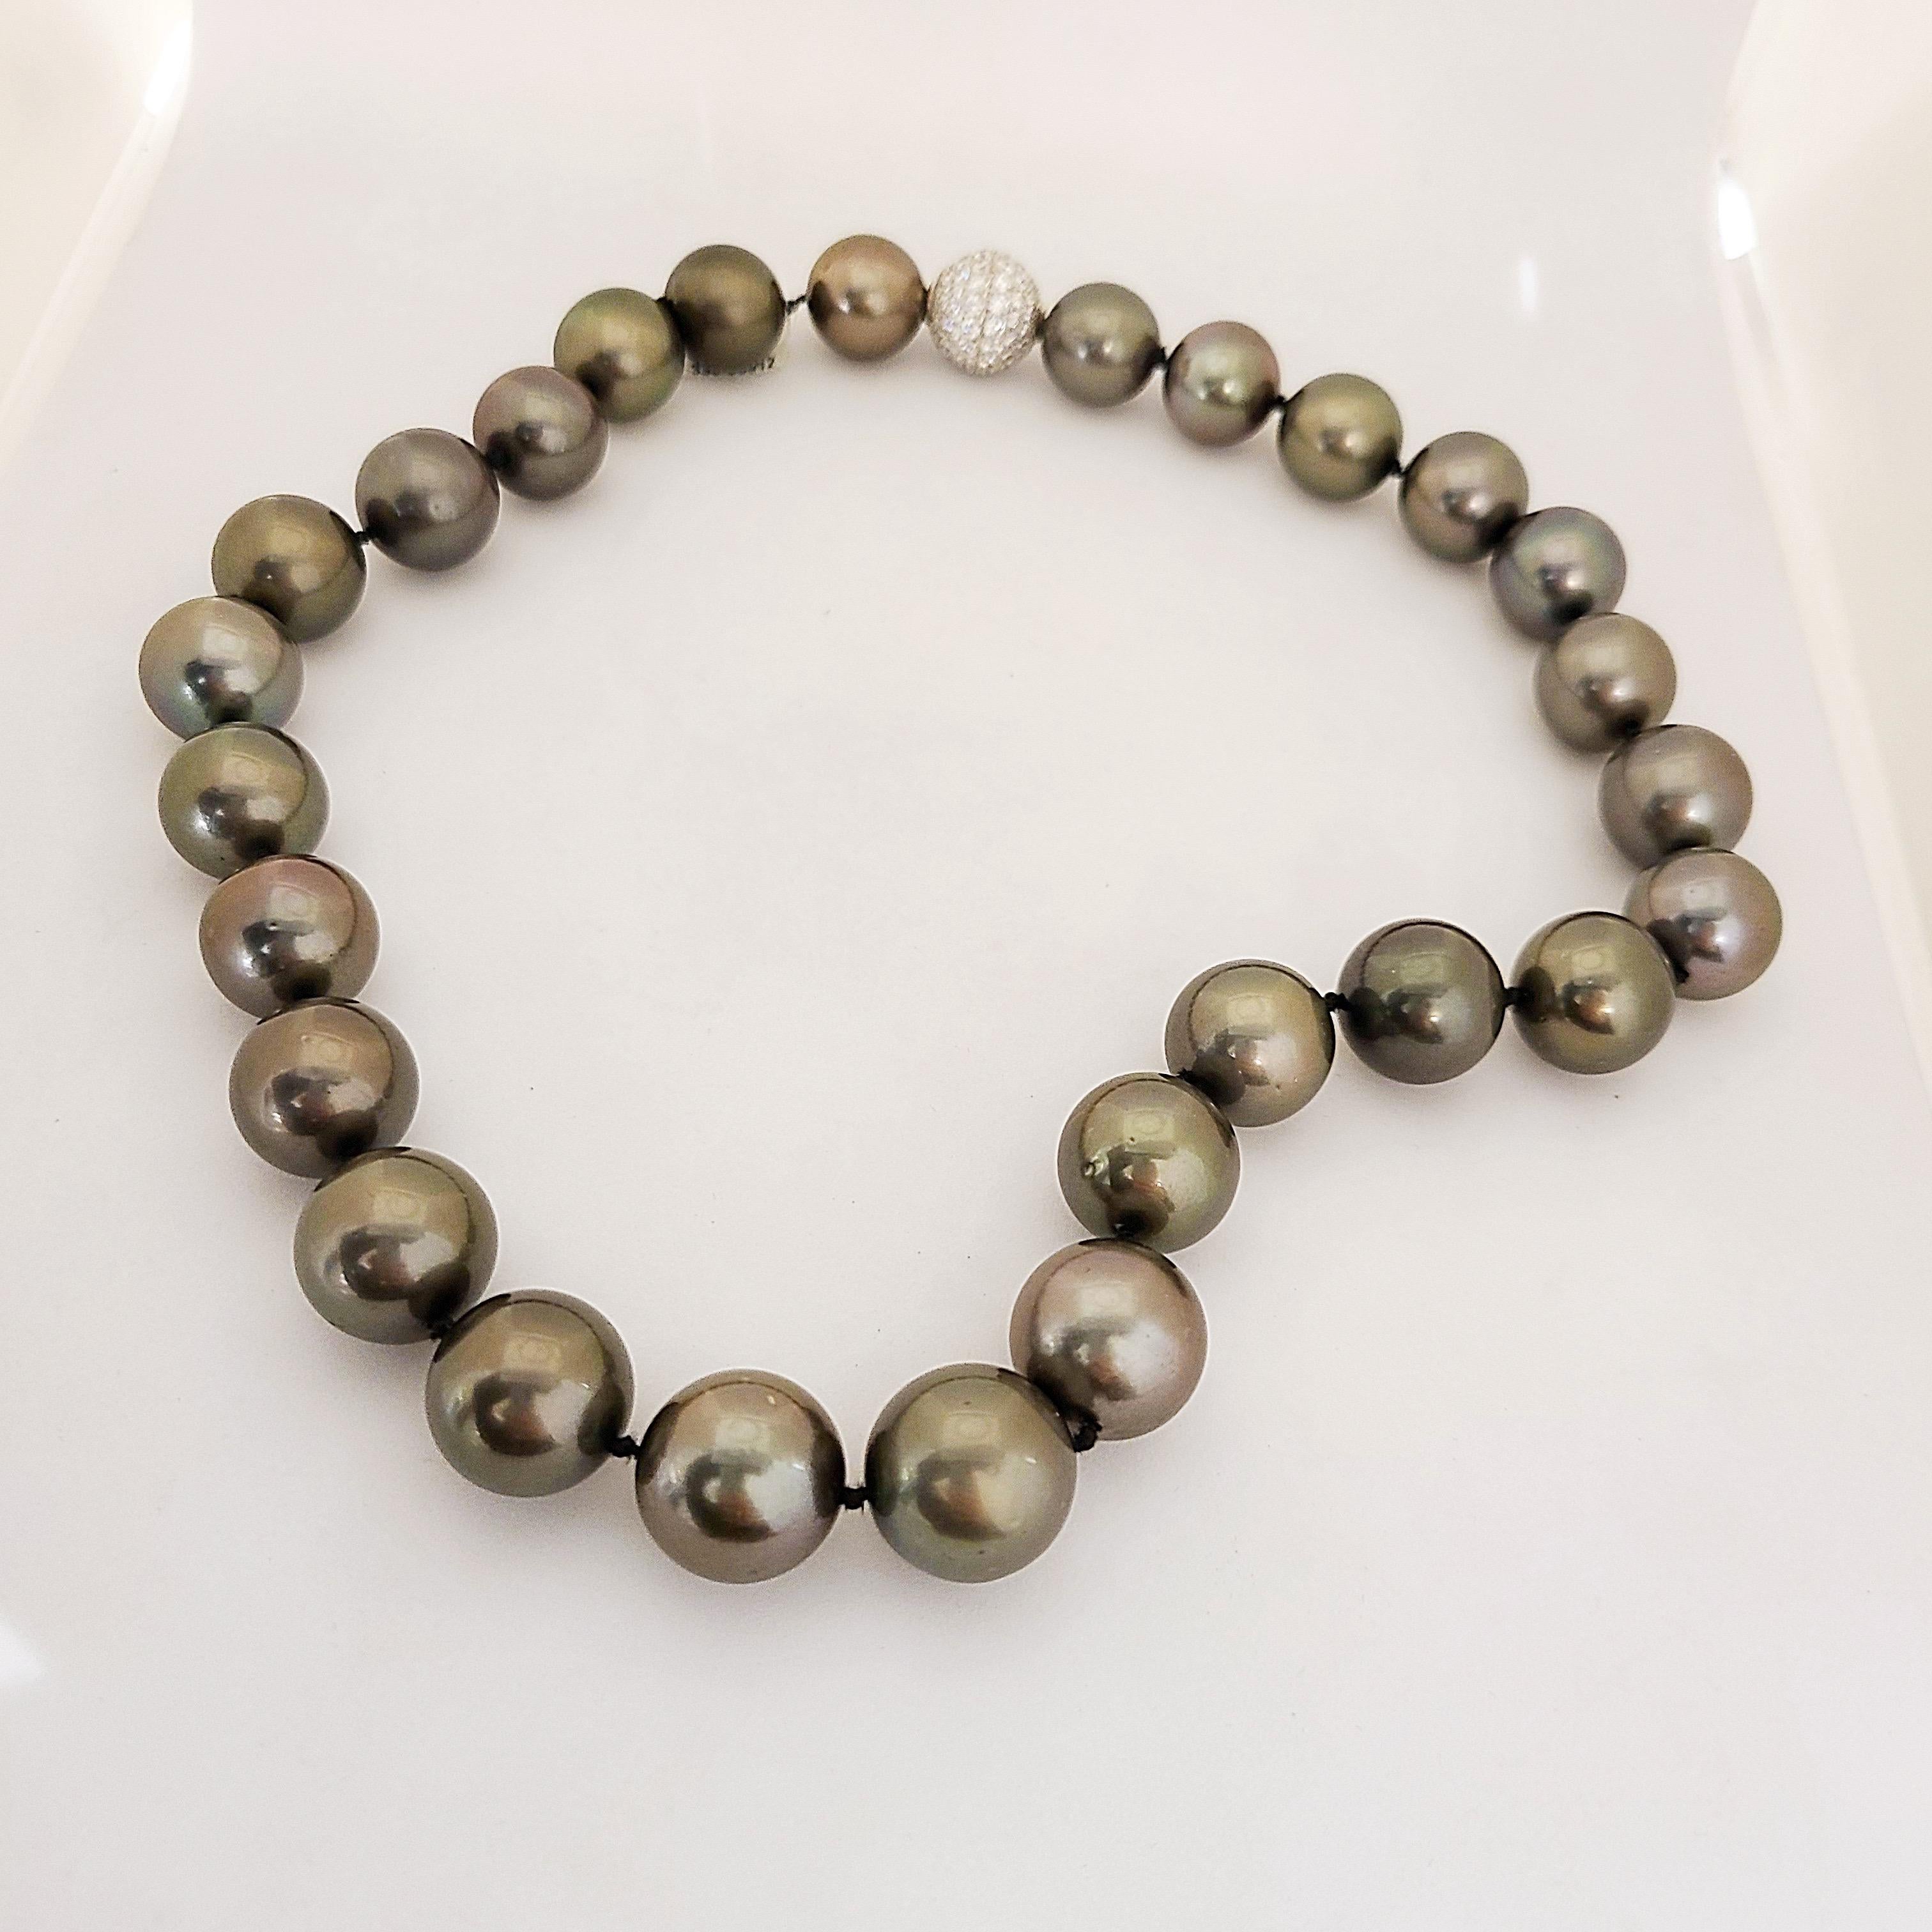 This gorgeous Black Tahitian South Sea pearl necklace features 27 pearls evenly matched for their radiant luster and overtones. With very slight graduation the pearls are 16.7x 15.00mm. The 15 mm platinum and diamond ball clasp is set with 4.58